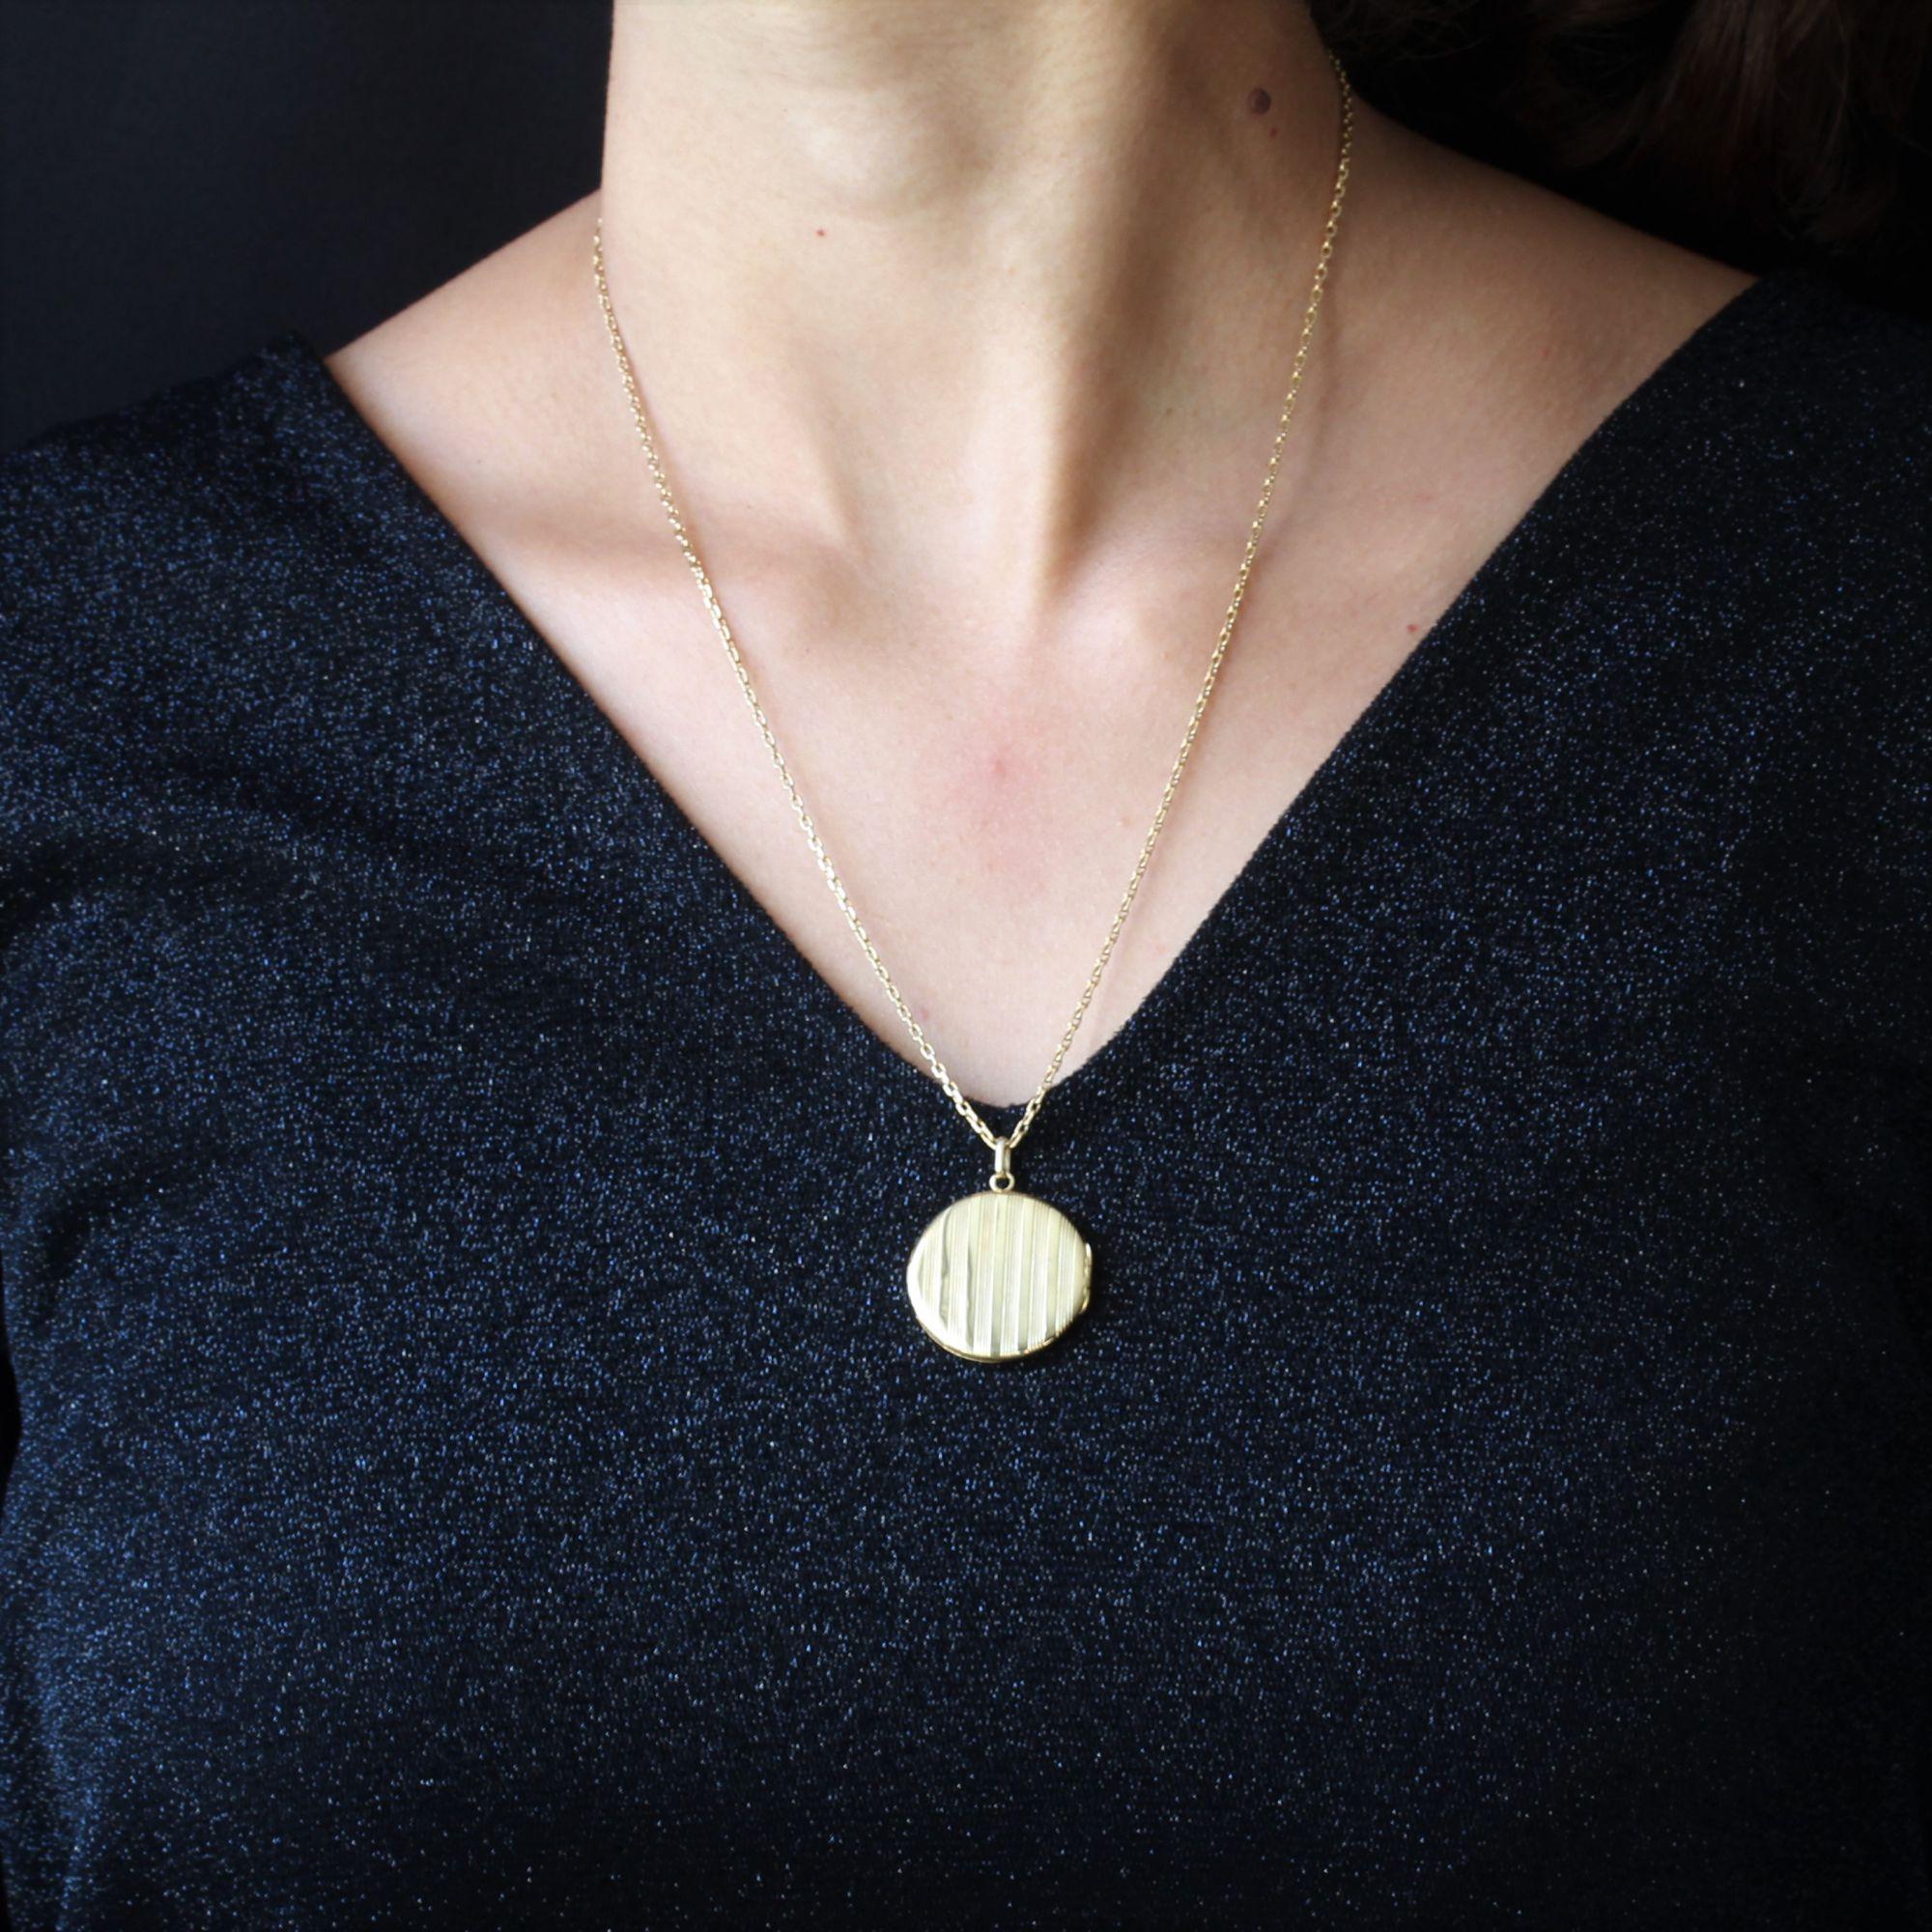 Pendant and chain in 18 karat yellow gold, eagle head hallmark.
Of round shape, opening, this antique medallion is decorated on its two faces of vertical striations alternated with polished pattern. It is supported by a yellow gold chain made of